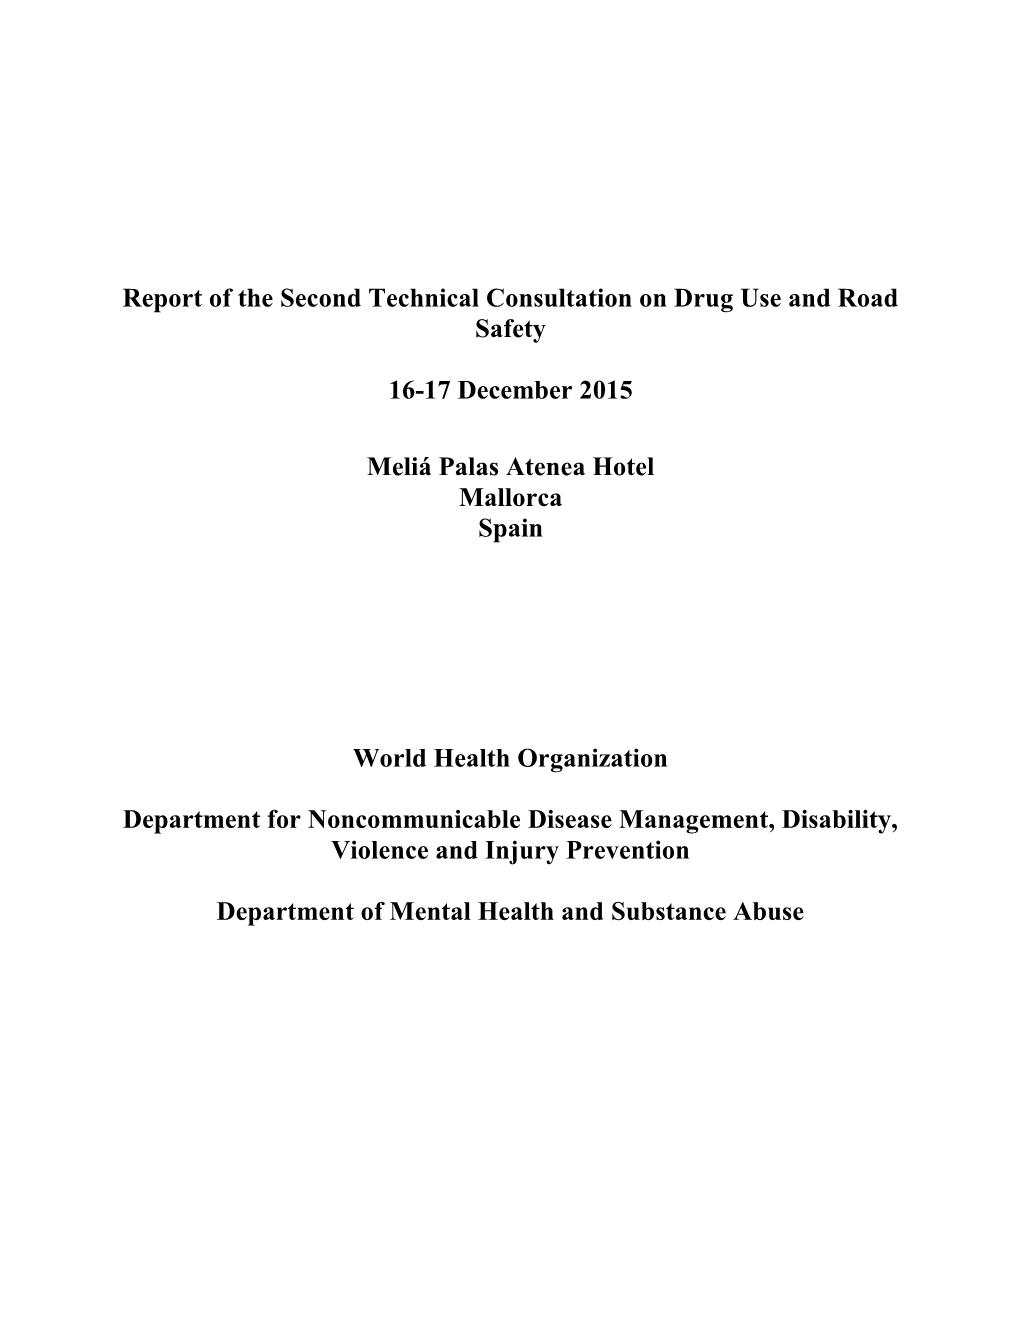 Report of the Second Technical Consultation on Drug Use and Road Safety